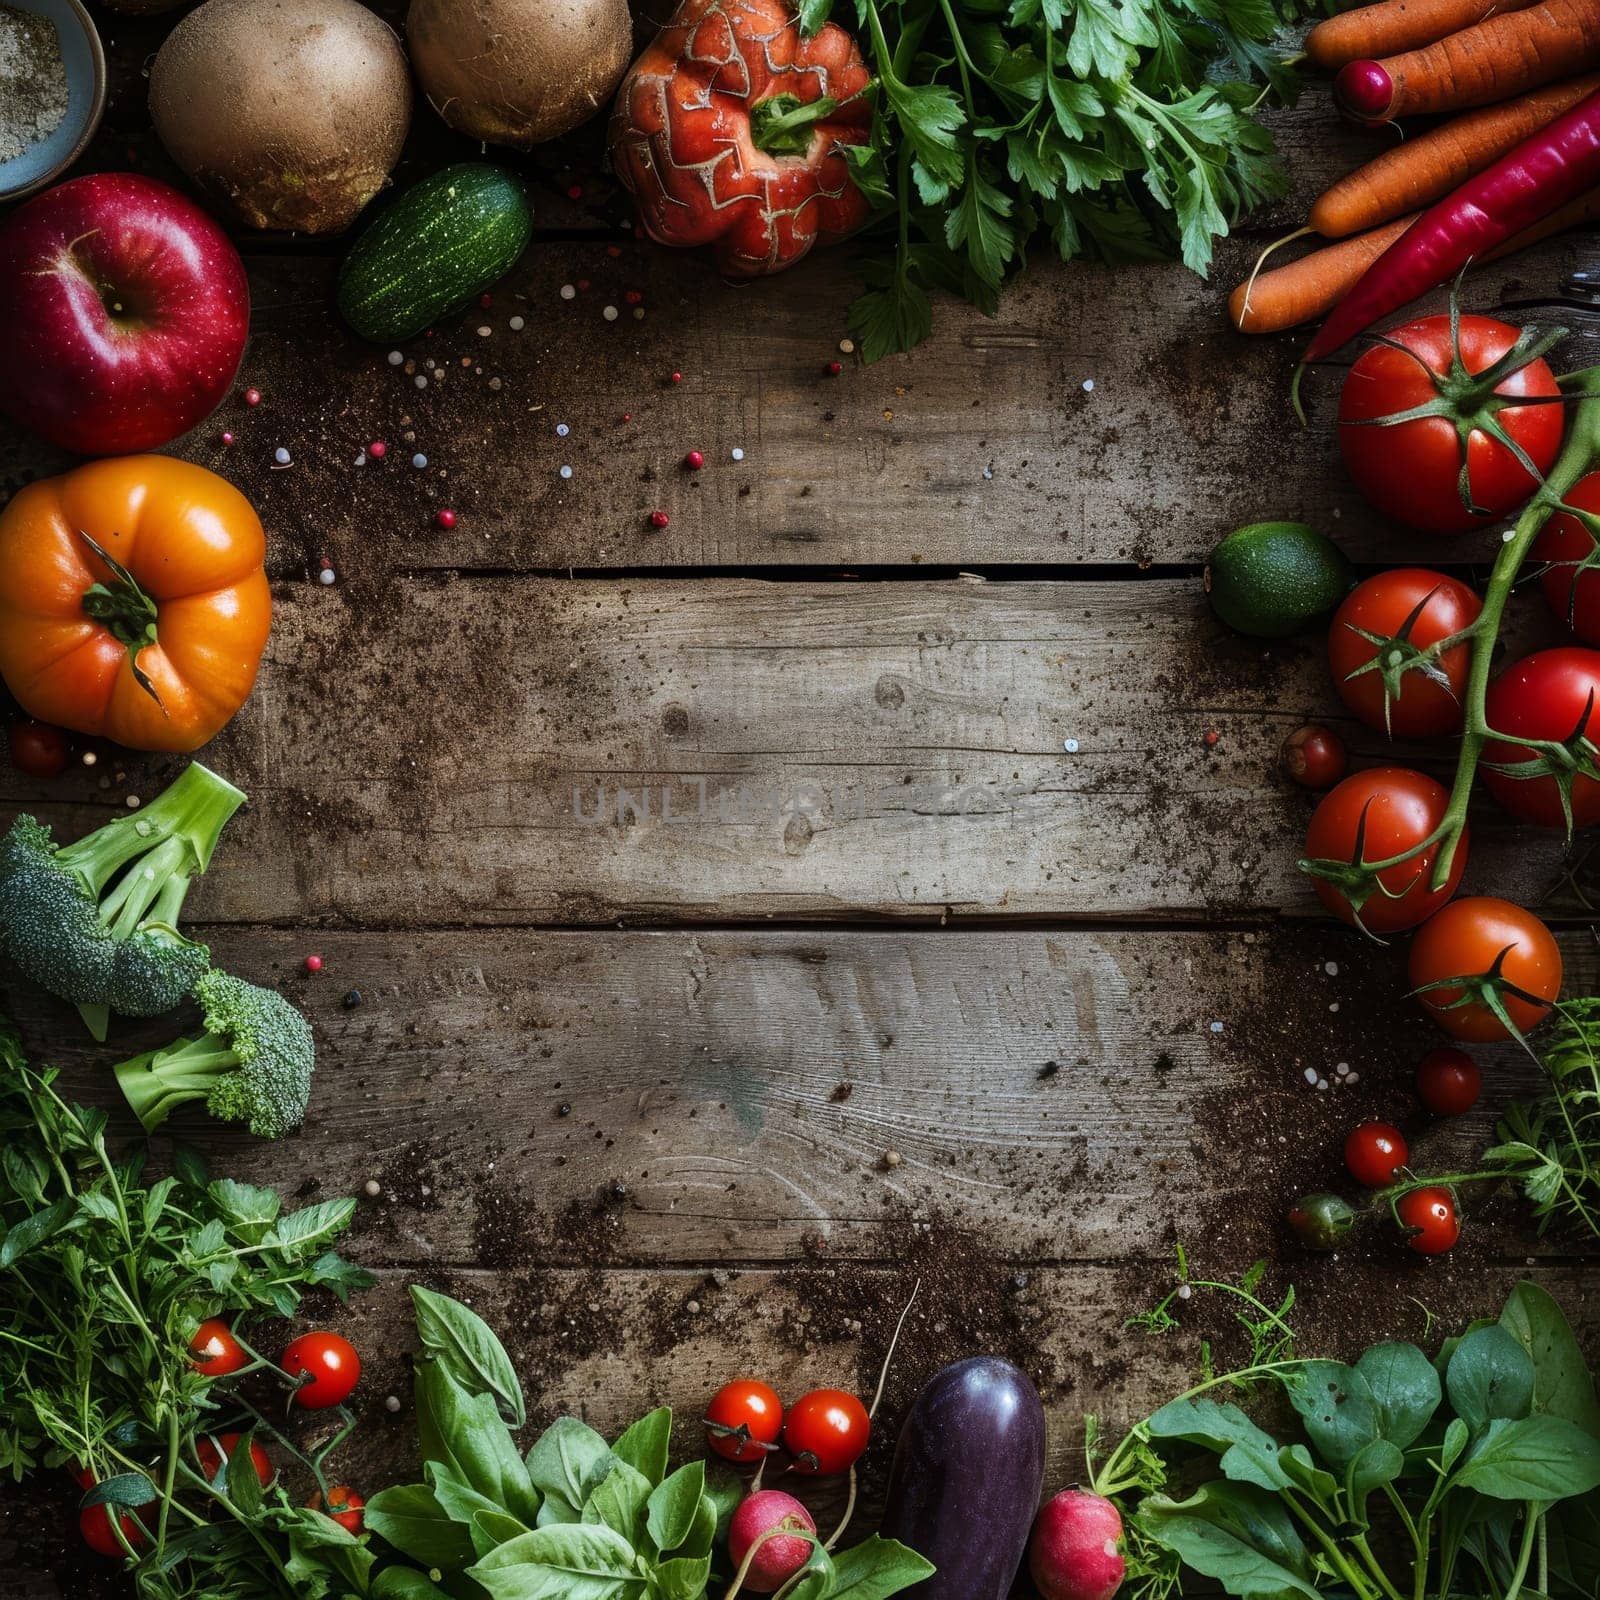 Assortment of fresh vegetables and fruits on rustic wooden background from above